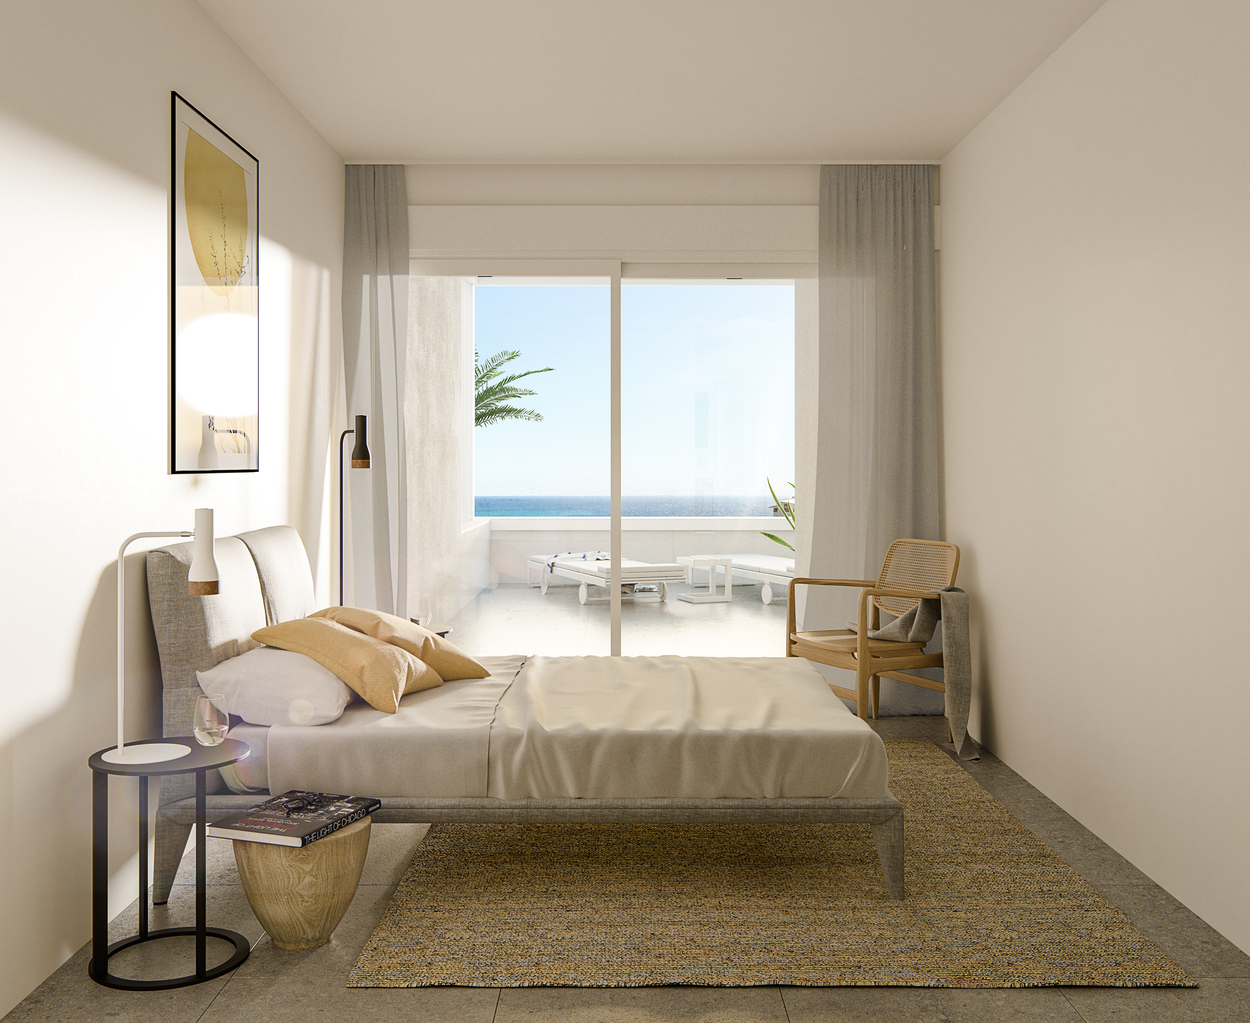 Villajoyosa: Modern and luxurious new build apartments with beautiful sea views